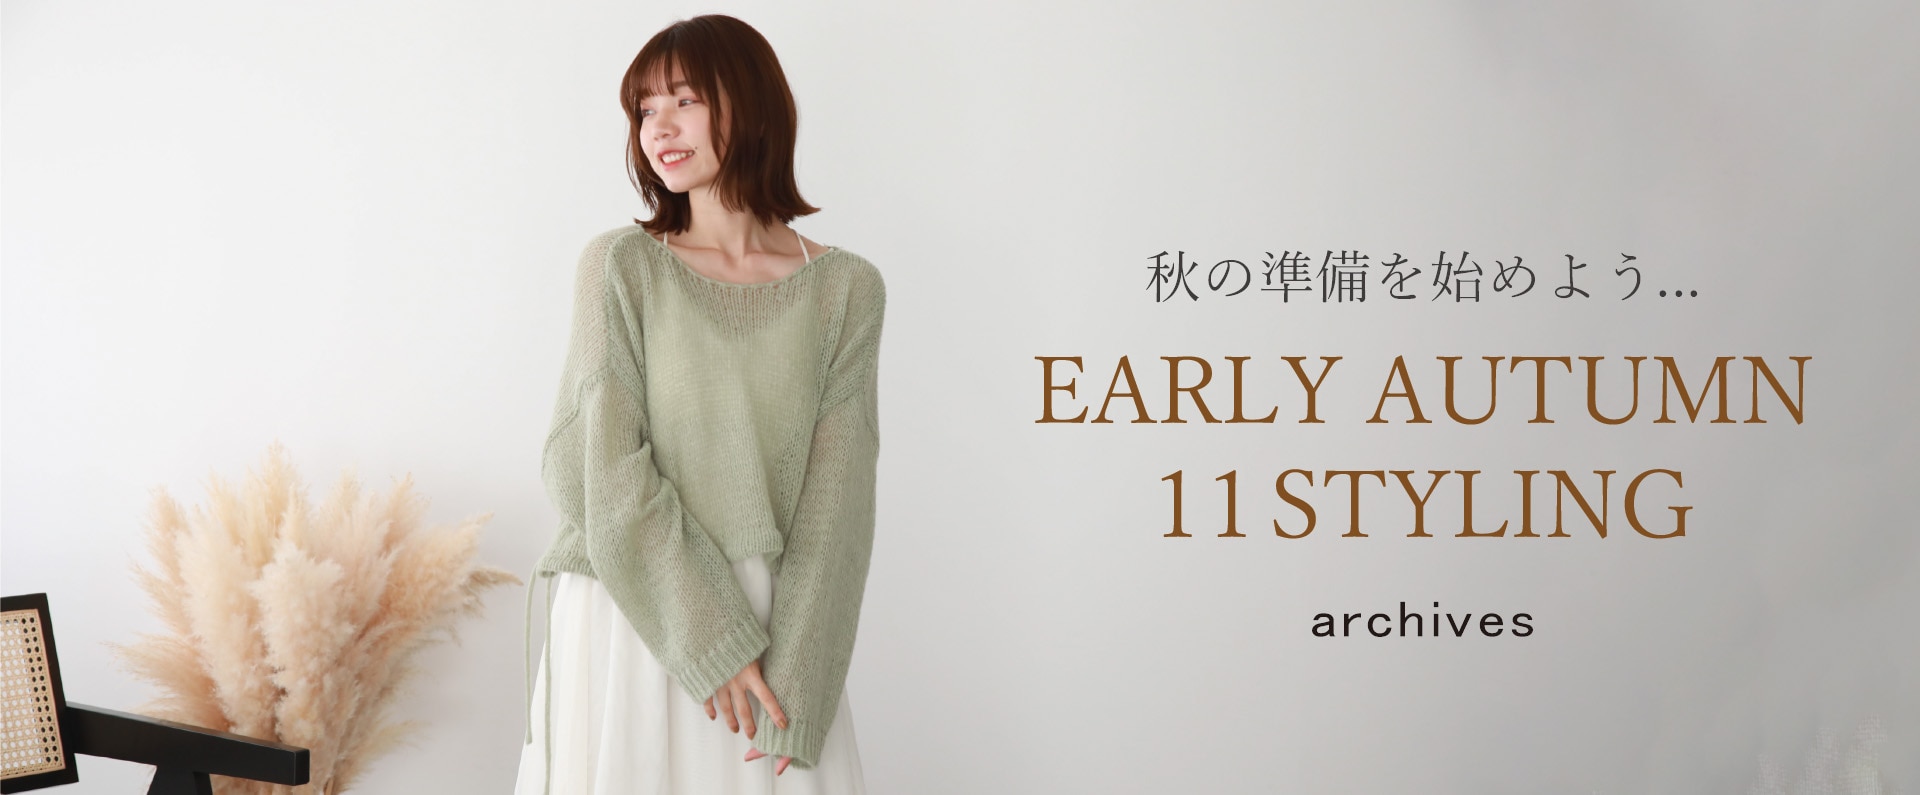 EARLY AUTUMN 11STYLING～秋の準備を始めよう～ | 特集 | P&M OFFICIAL ...